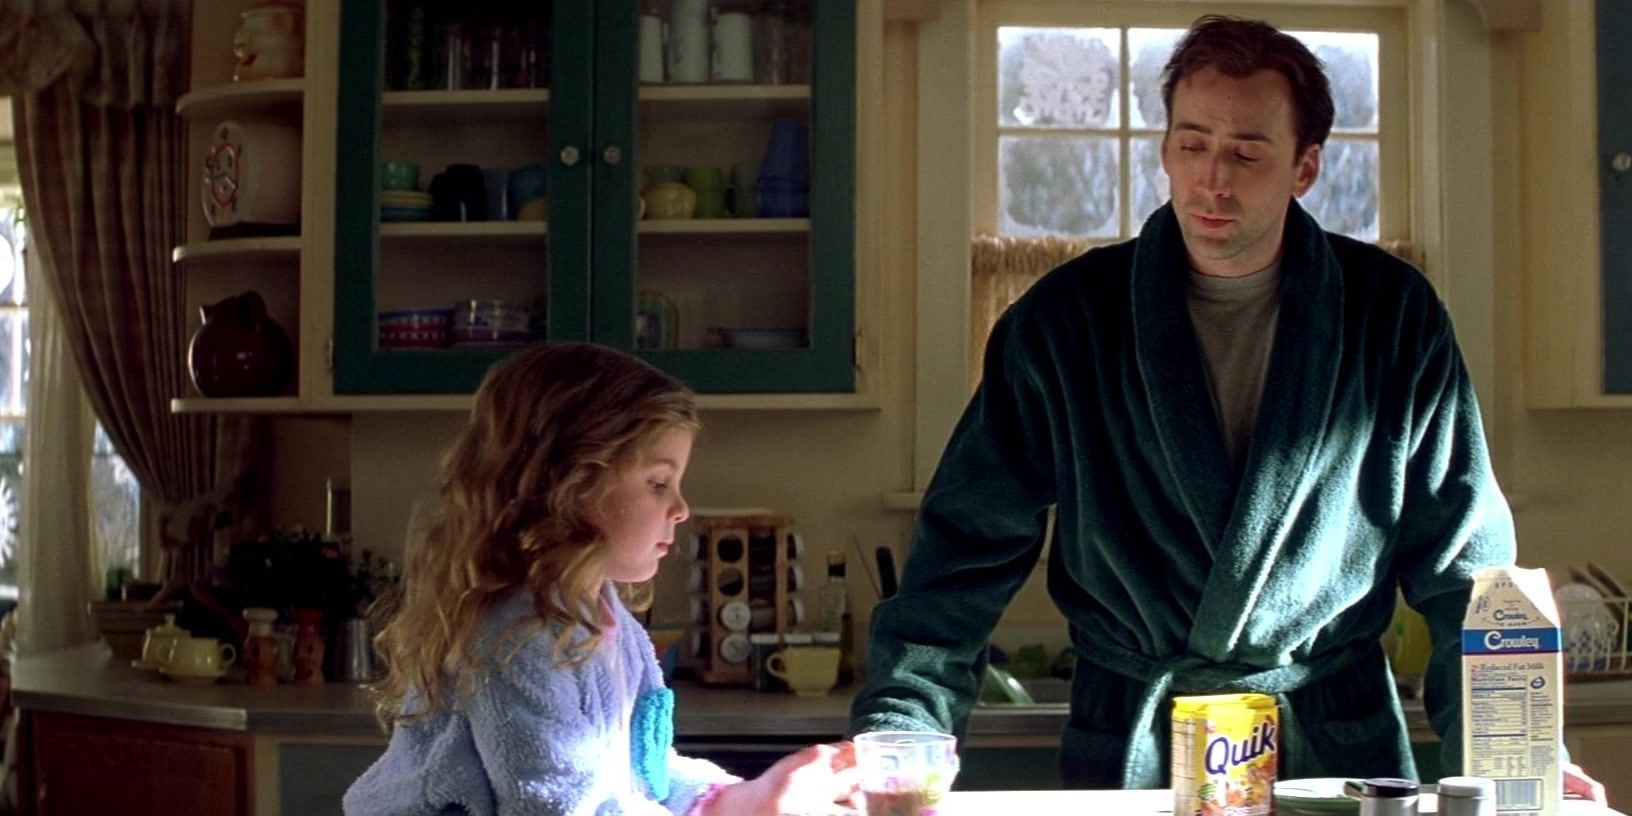 Nicolas Cage looks at his daughter in The Family Man